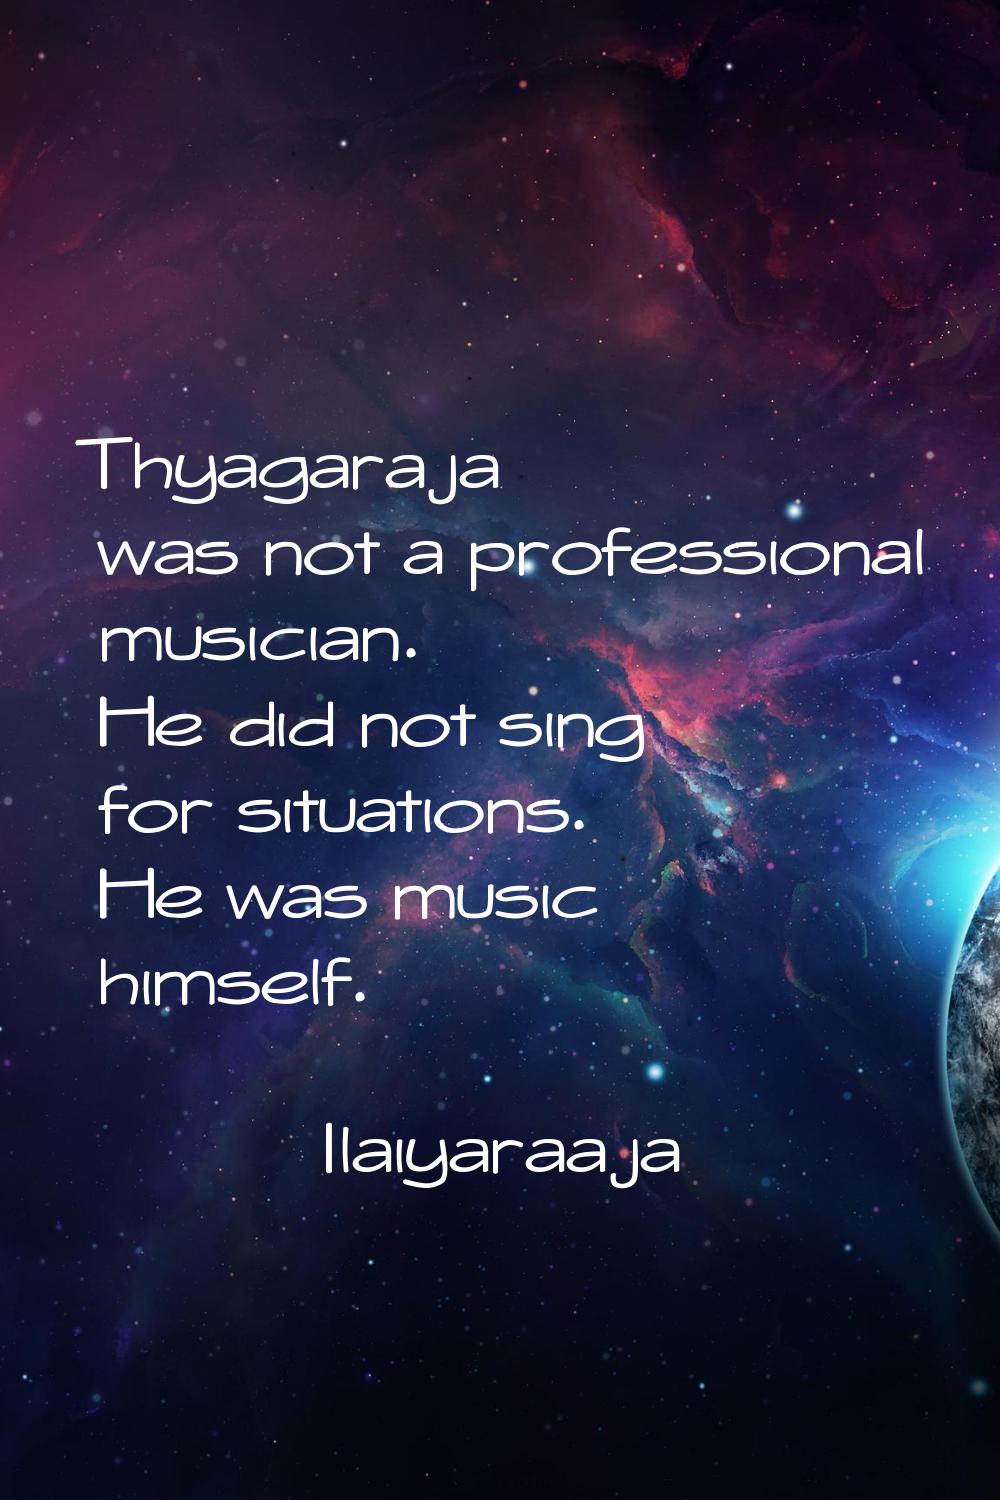 Thyagaraja was not a professional musician. He did not sing for situations. He was music himself.